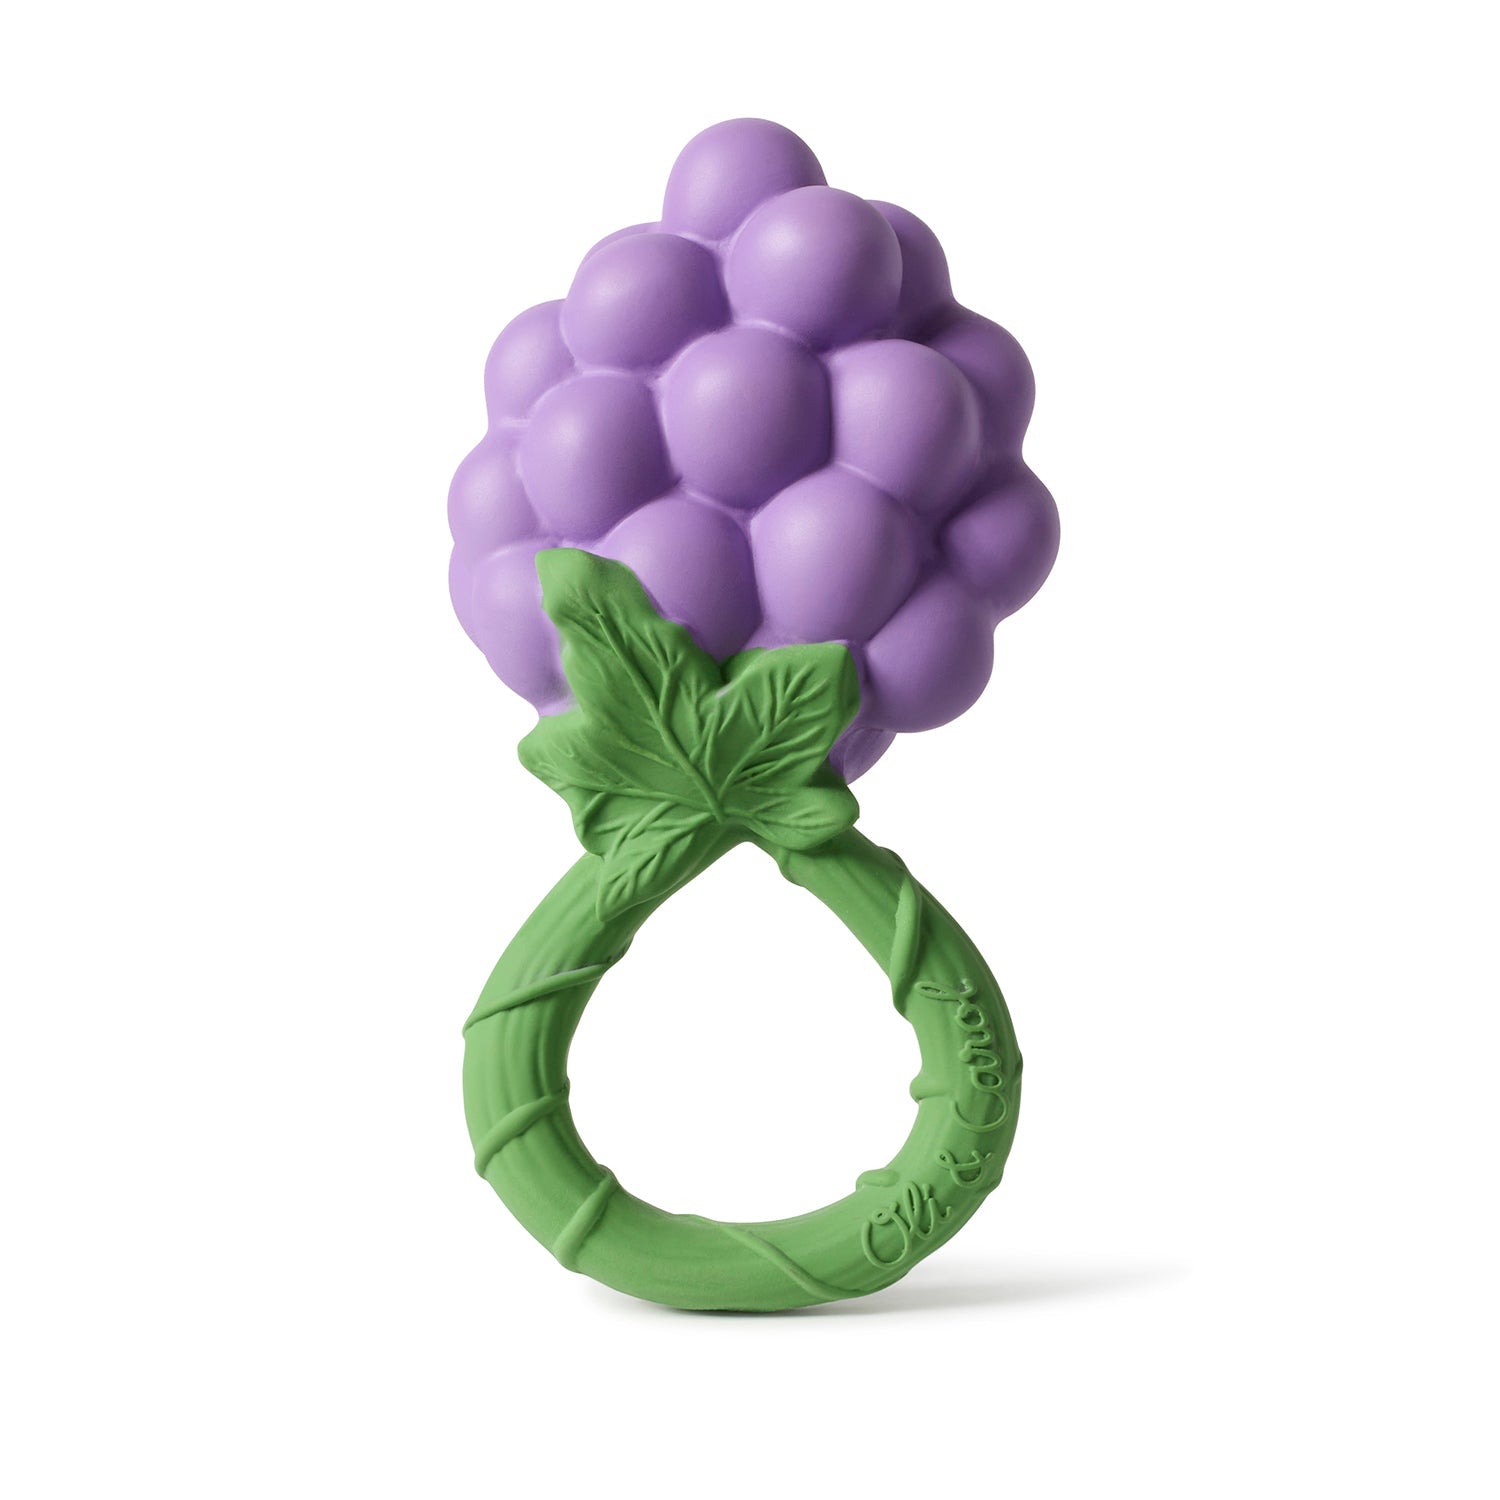 Oli & Carol - Natural Rattle Toys - all things being eco chilliwack - natural rubber teething toys - grapes